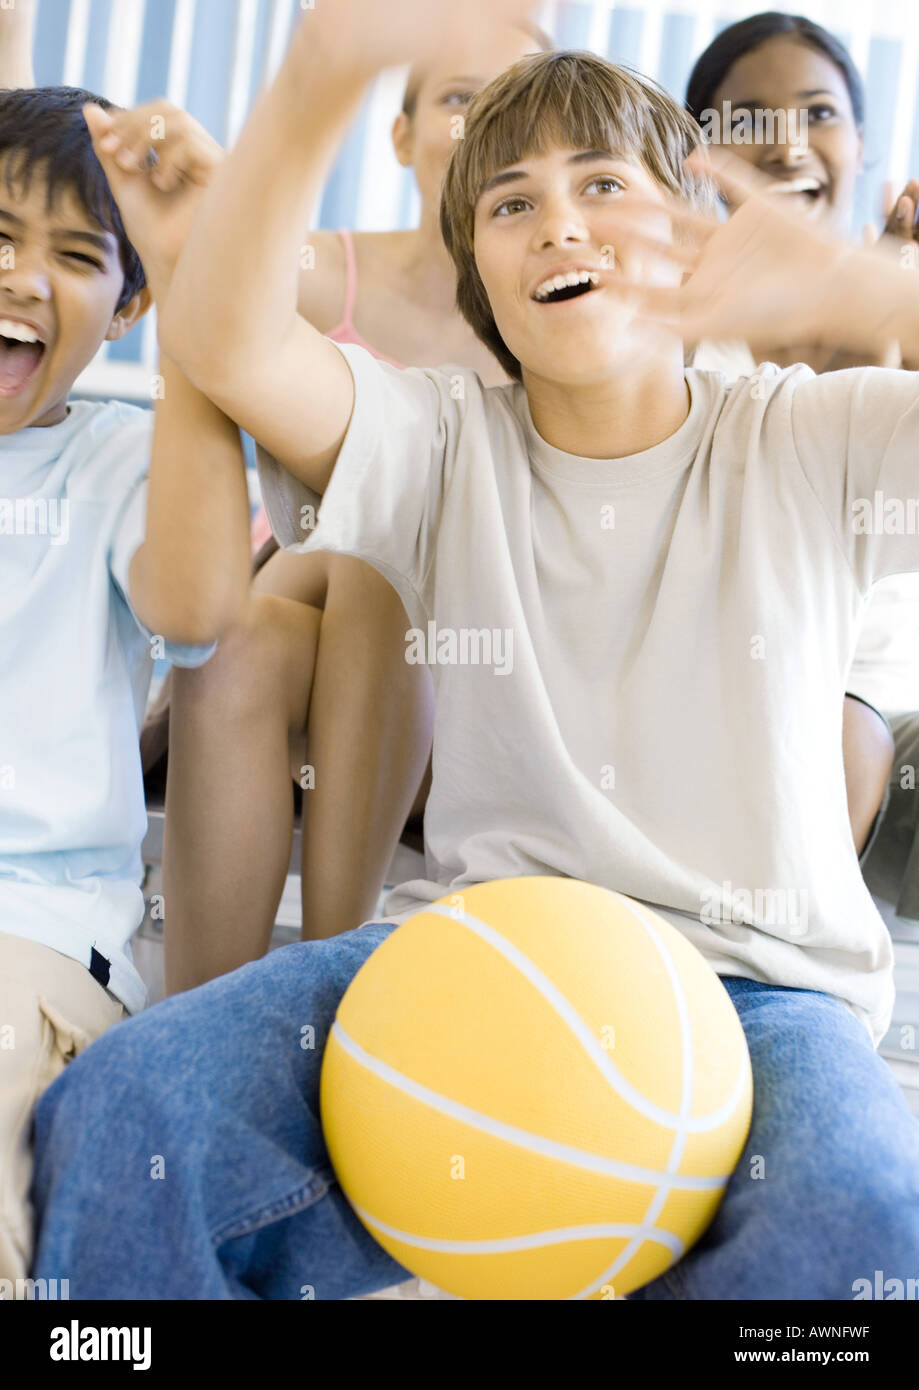 Group of high school students sitting with basketball, cheering Stock Photo